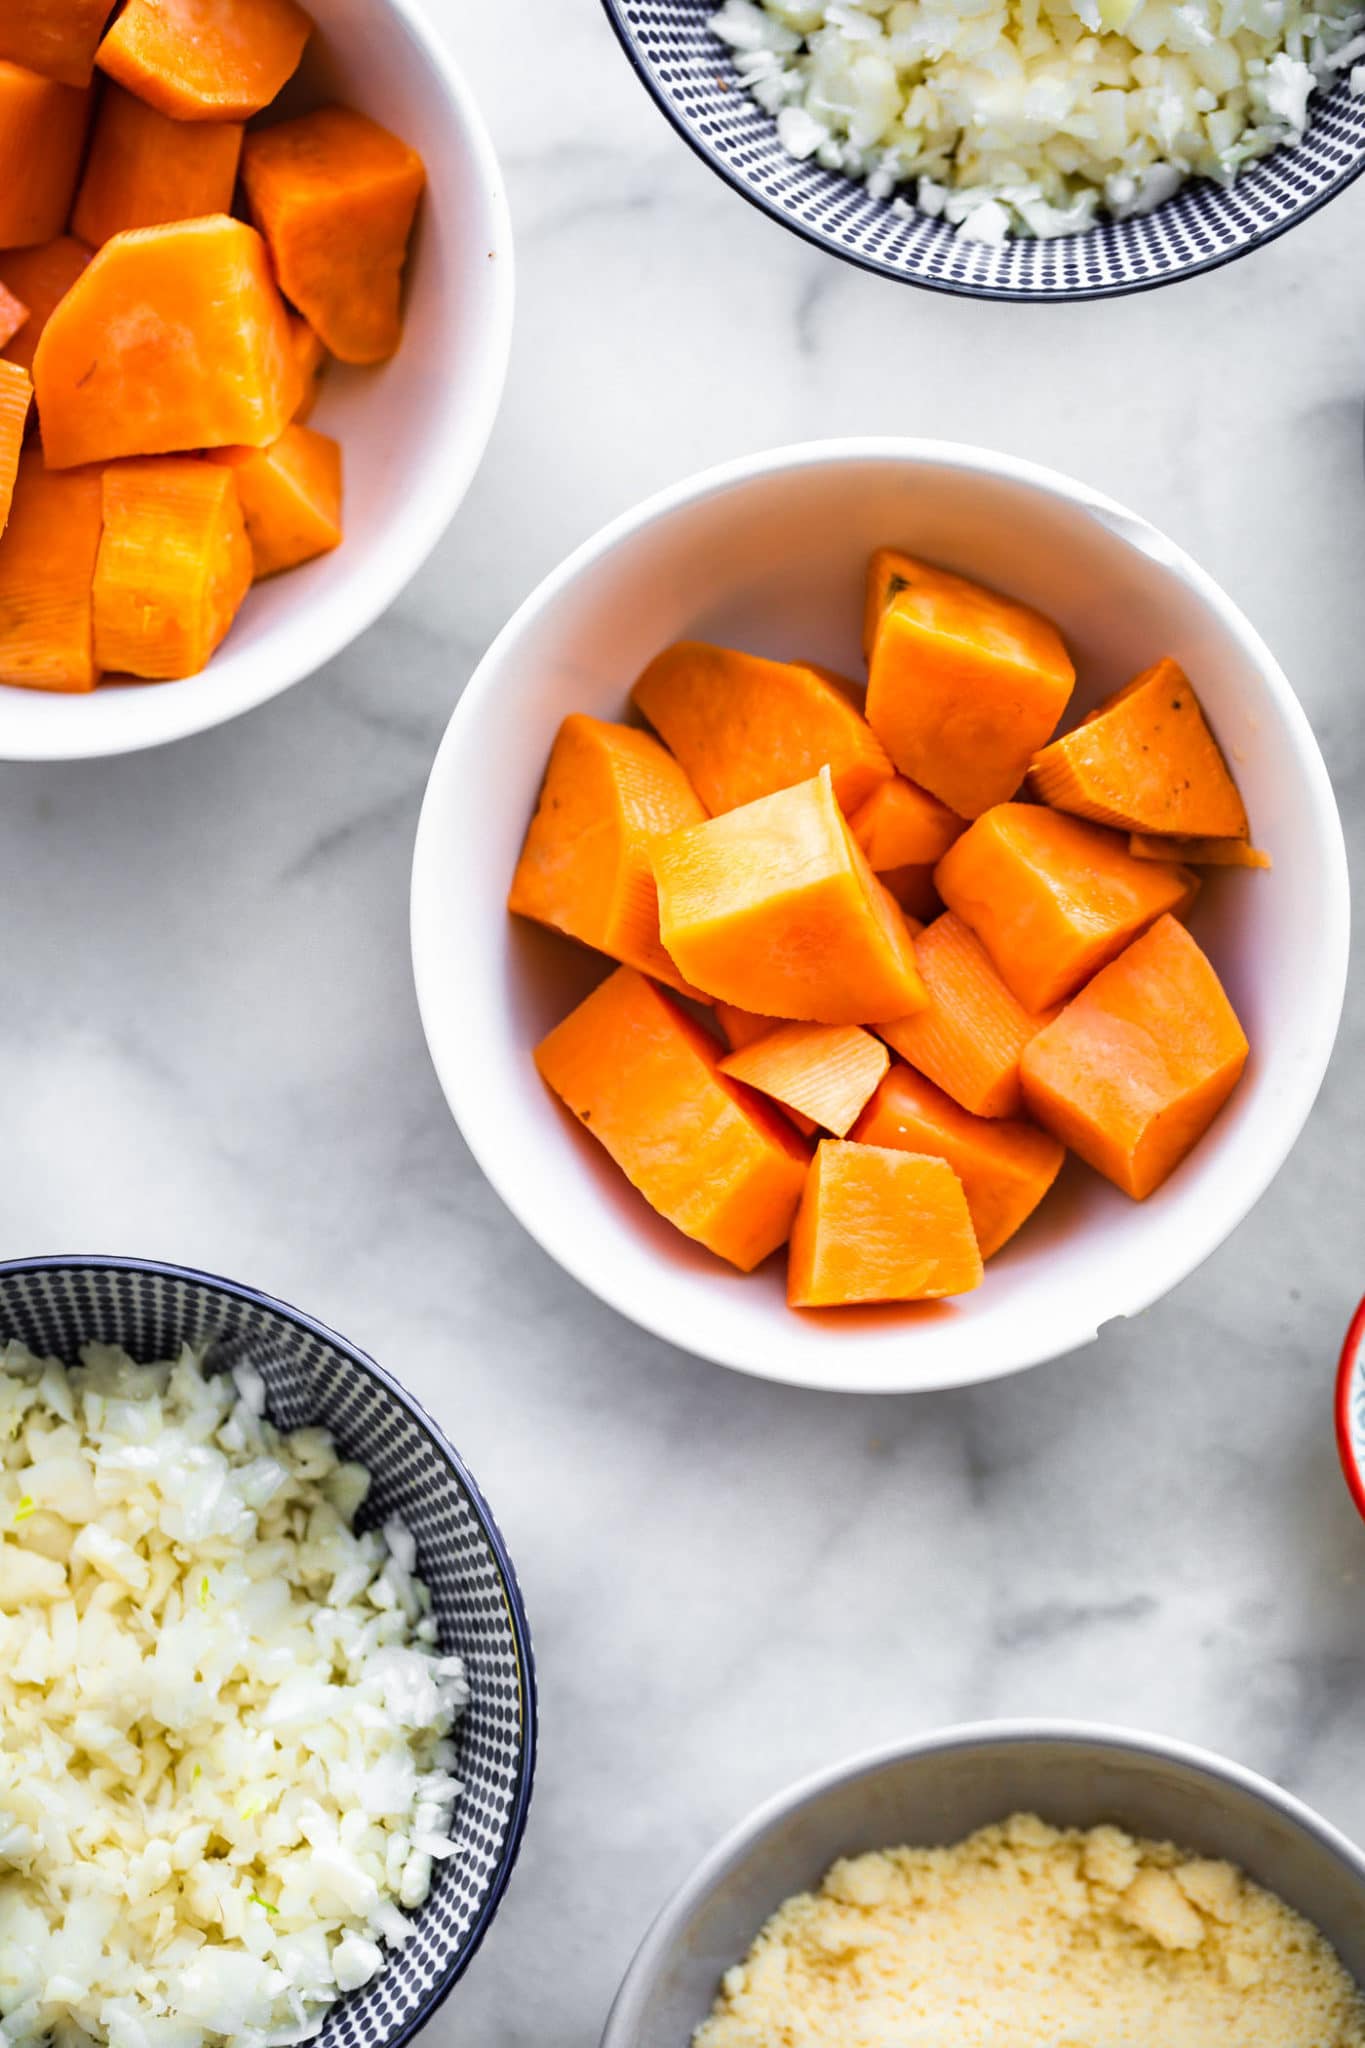 sweet potatoes, reiced cauliflower, and ingredients for sweet potato tots in mixing bowls